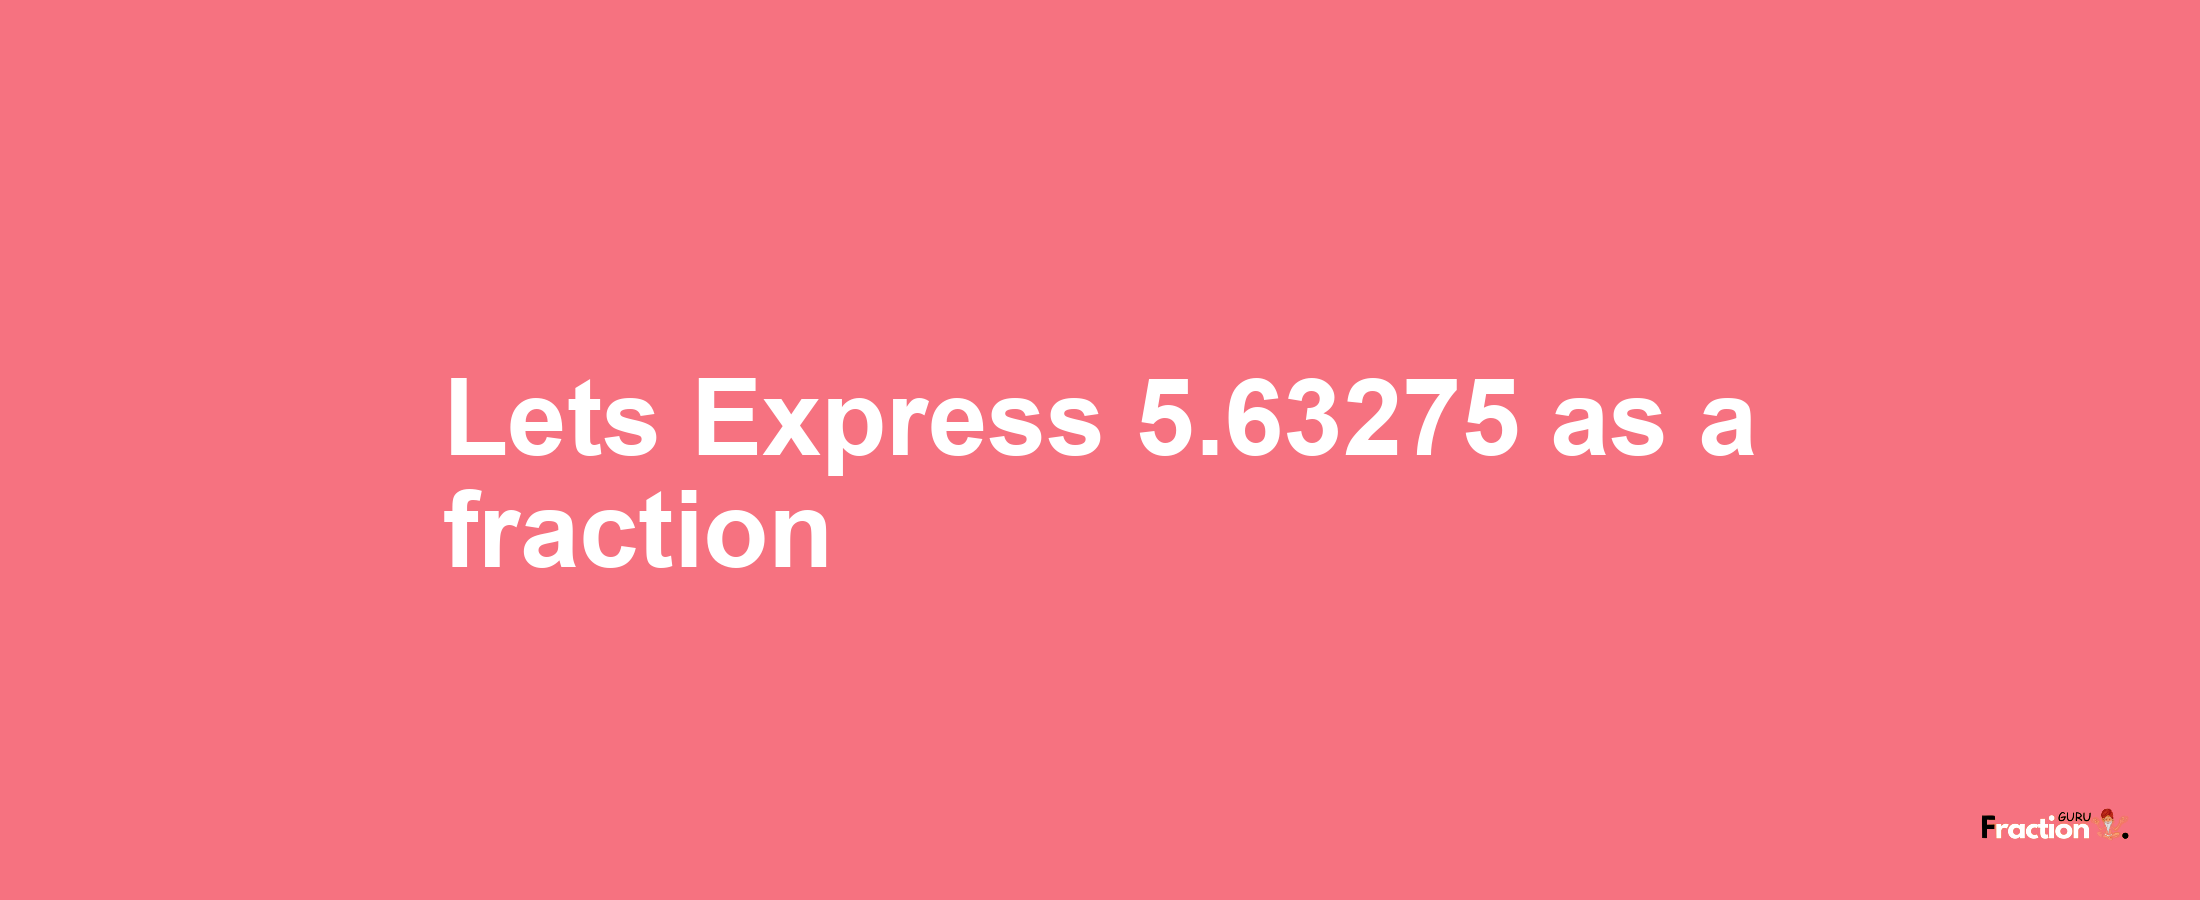 Lets Express 5.63275 as afraction